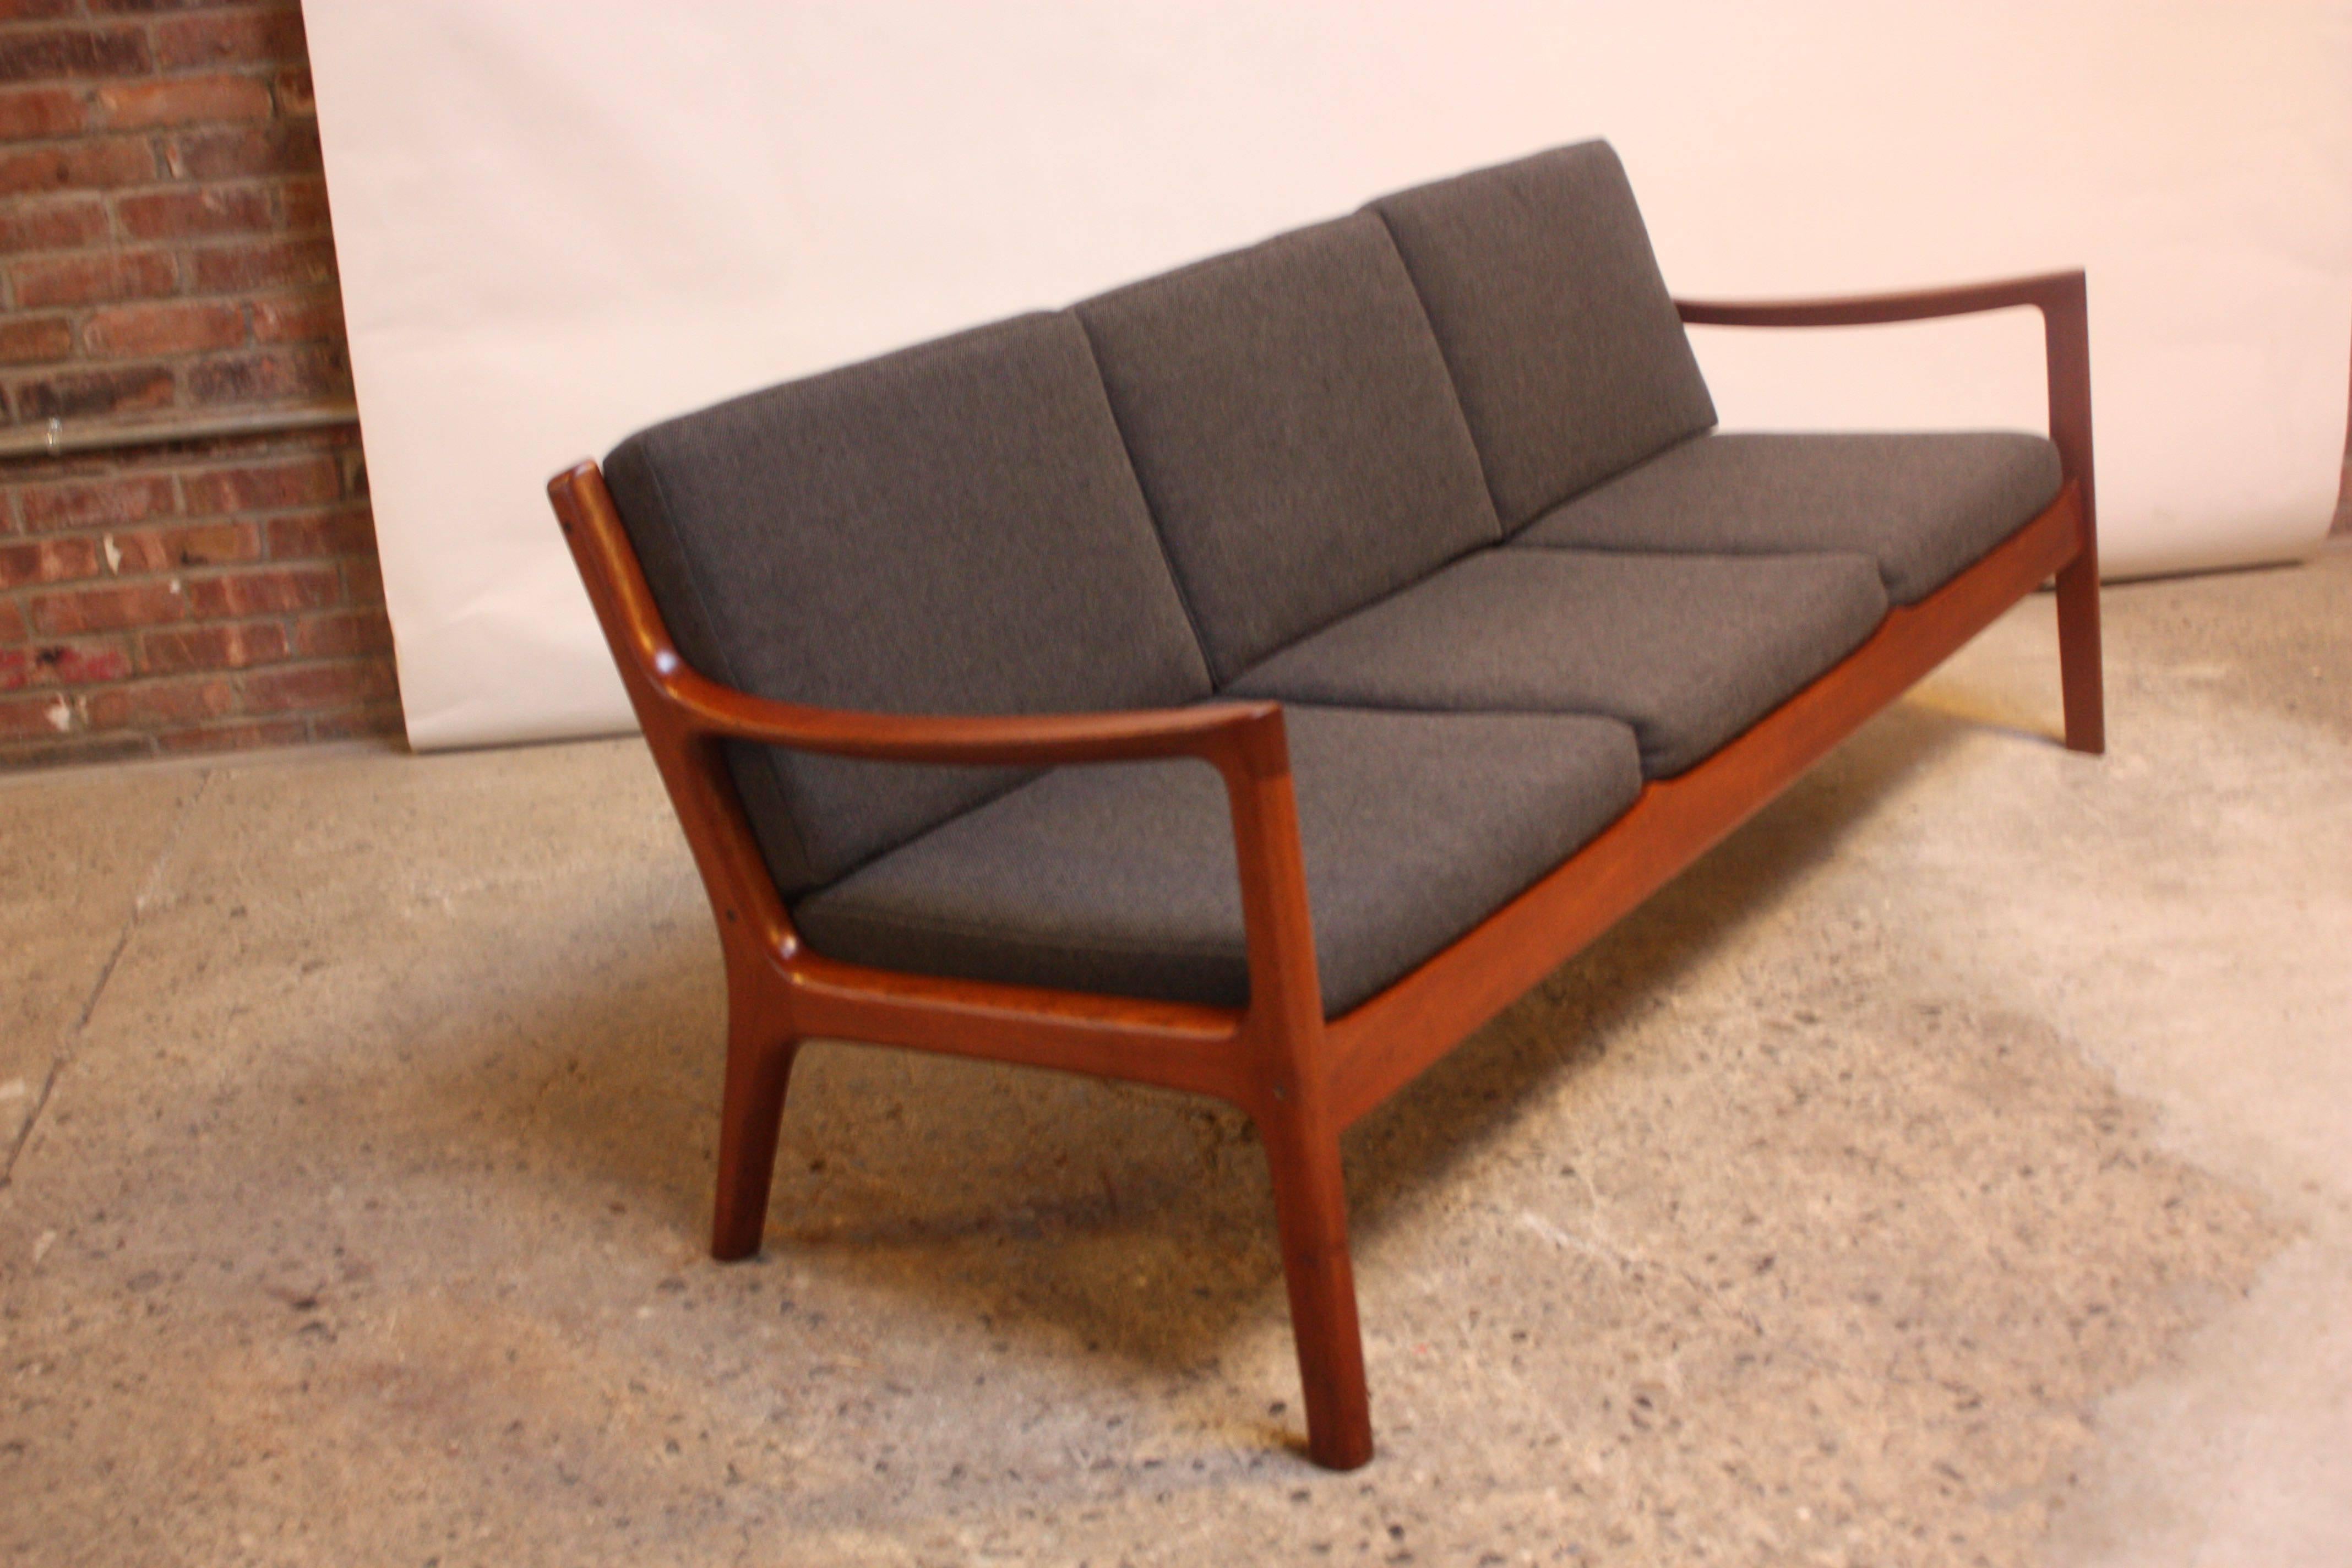 This teak three-seat sofa was designed by Ole Wanscher for France & Son as part of his 'Senator' line. This example is an early France & Son production (1965, as indicated by the stamp) and retains two manufacturer medallions to the frame. This